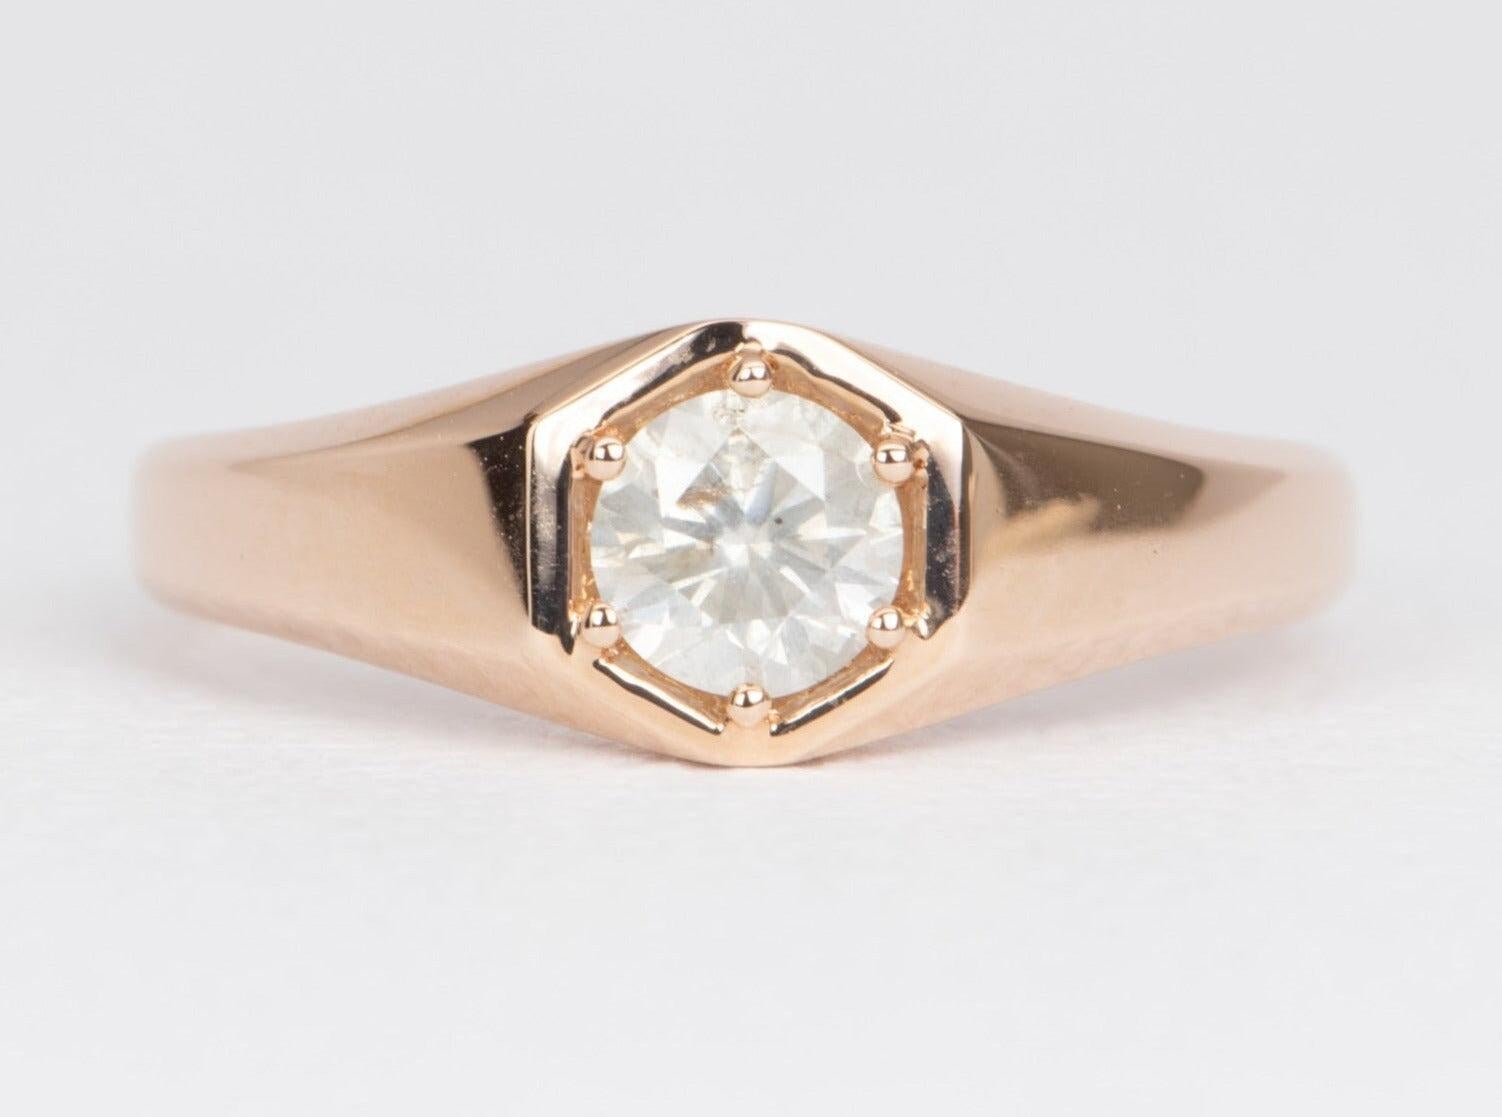 ♥ Solid 14K rose gold signet ring set with a milky white hexagon diamond in the center
♥ The overall setting measures 7.2 mm in width, 6.1 mm in length, and sits 3.8 mm tall from the finger

♥ US Size 7 (Free re-sizing up or down one size)
♥